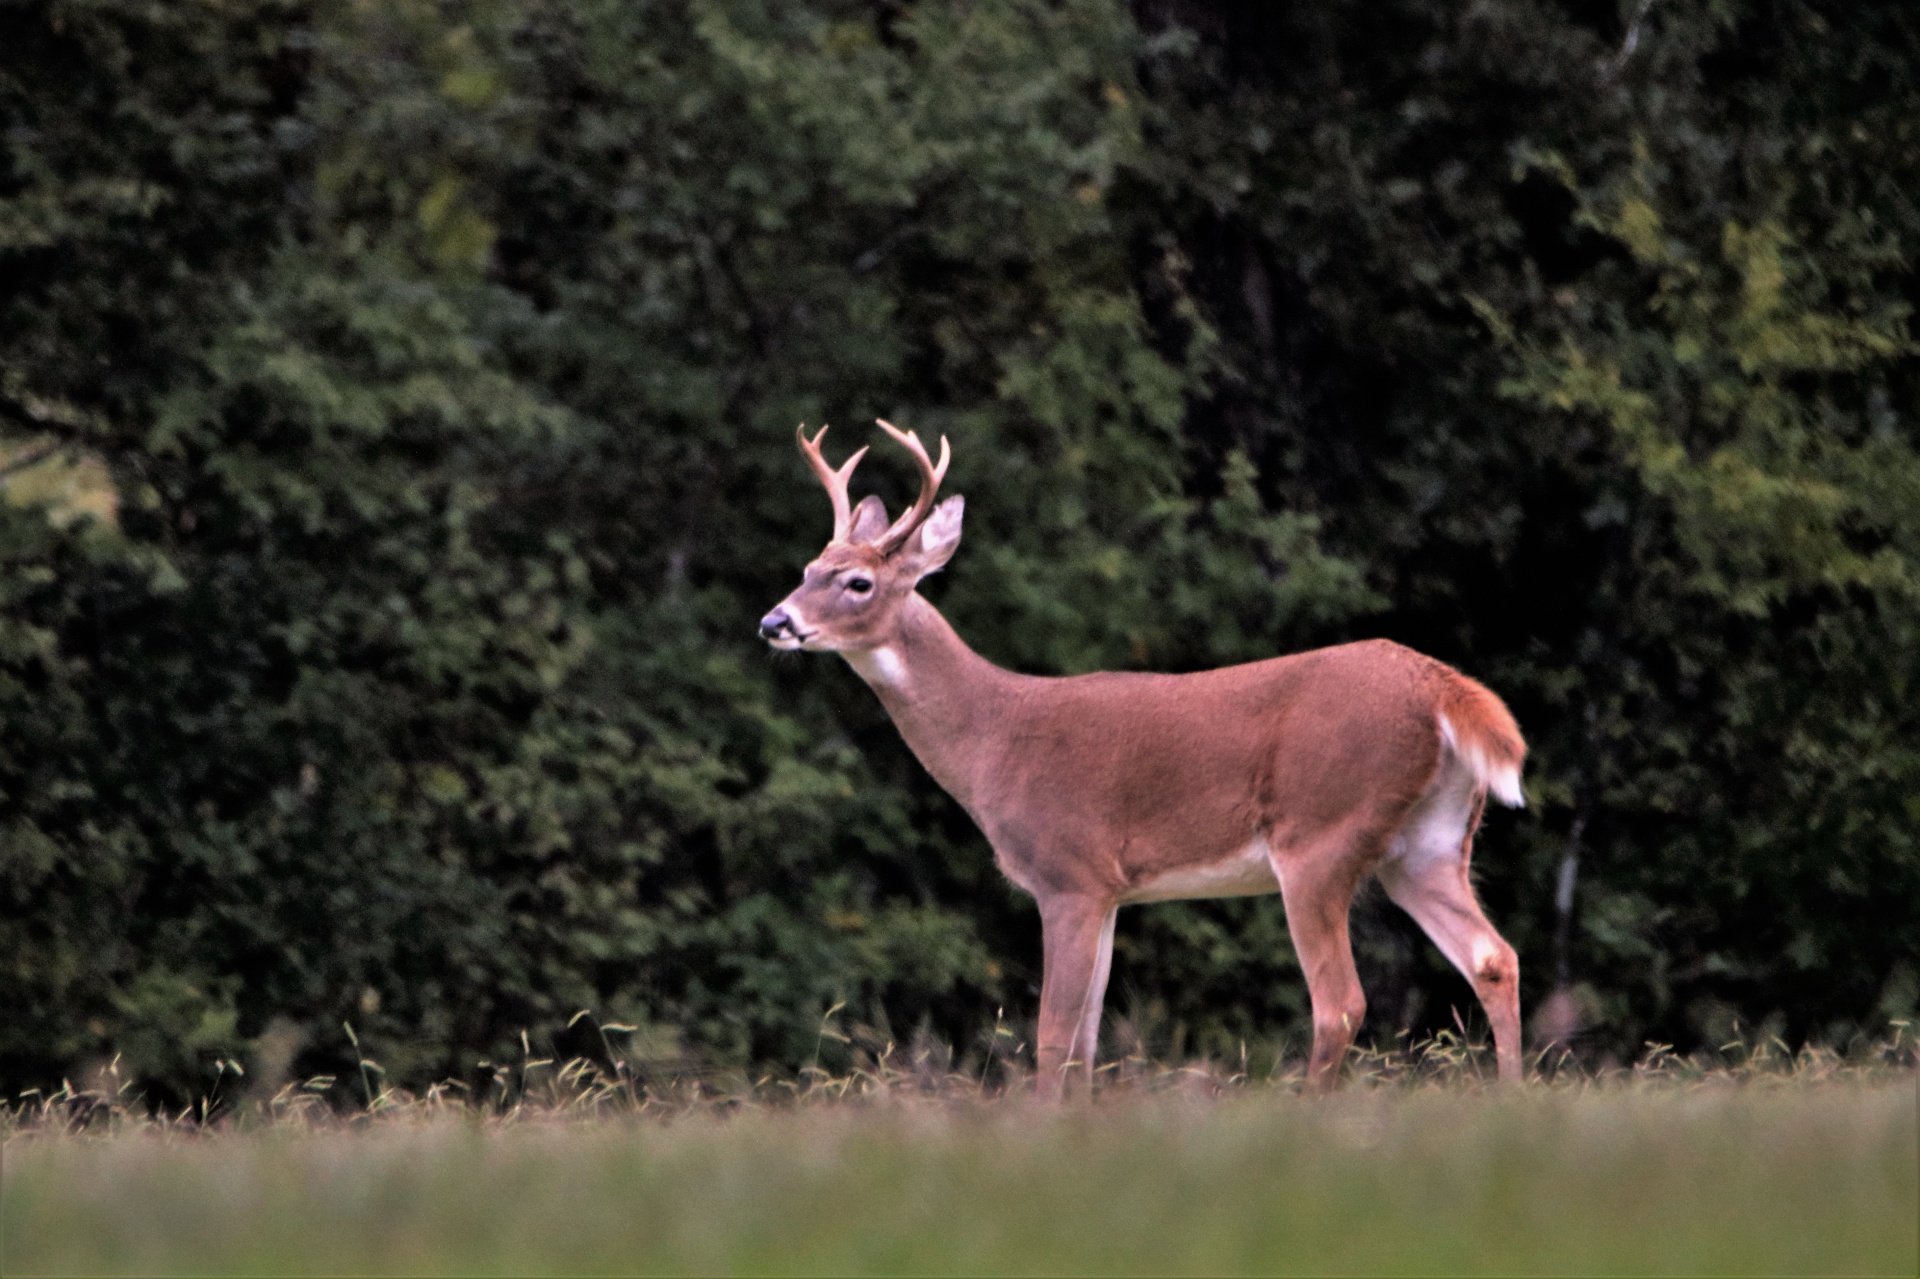 An 8 point white-tail buck deer, standing in green grass with neck stretched out, is smelling the air during mating season.